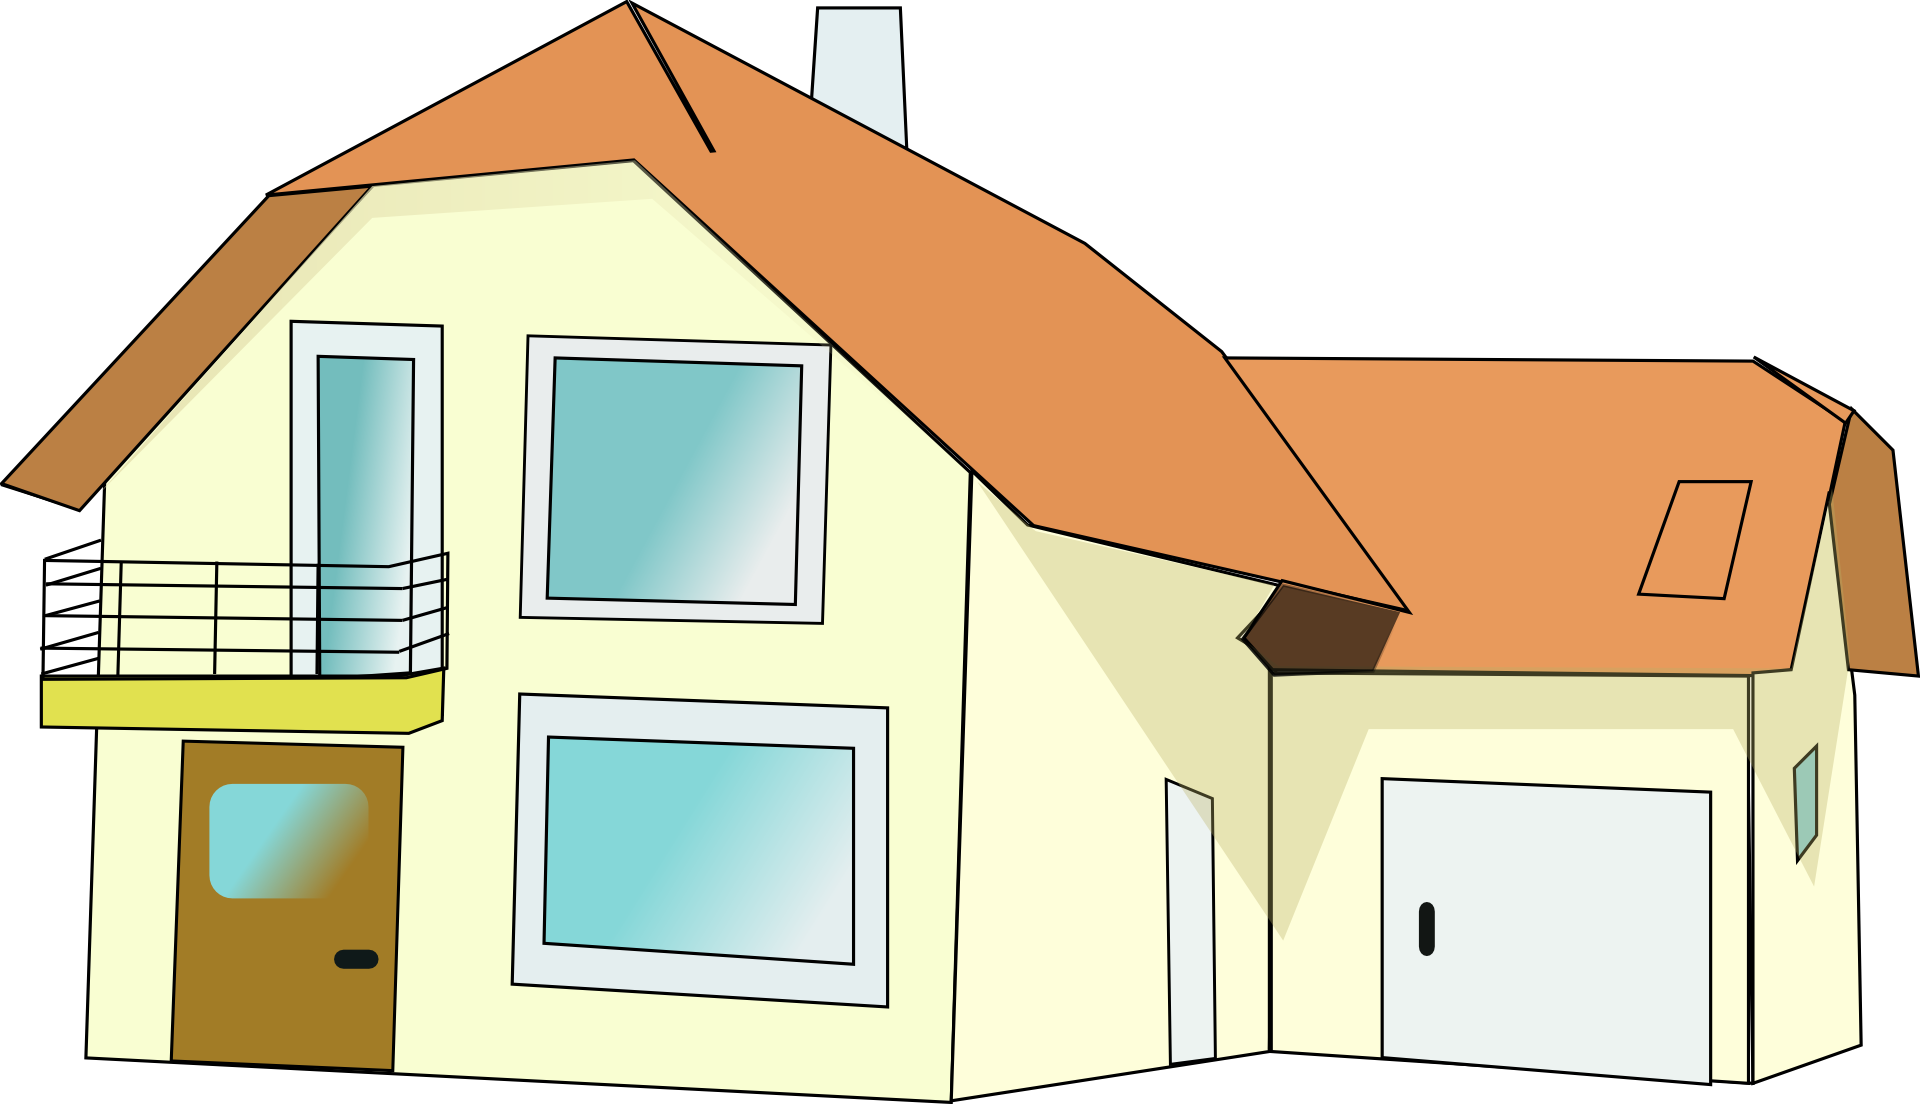 Suburban house with balcony, illustration free image download